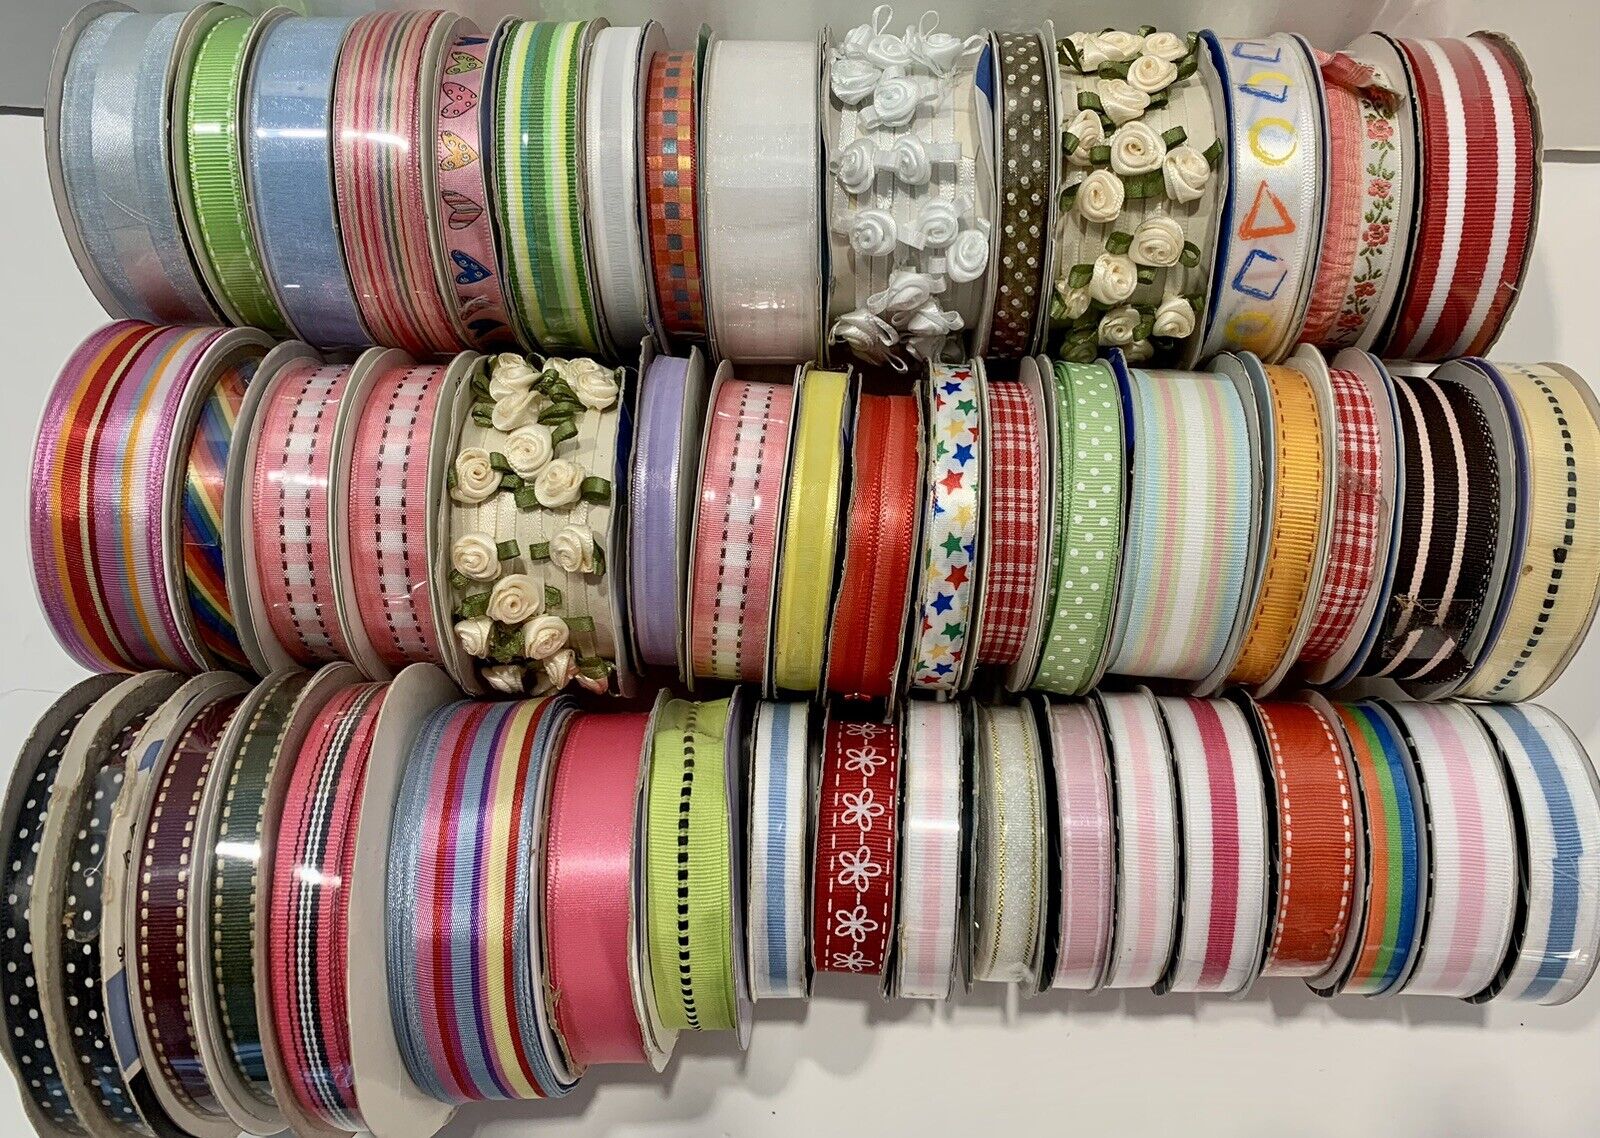 50 ROLL LOT 3/8 5/8 7/8 One of a Kind Asst Dots Stripes Sheer Novelty Grosgrain Ribbon -  Oh My Gosh Goodies Ribbon